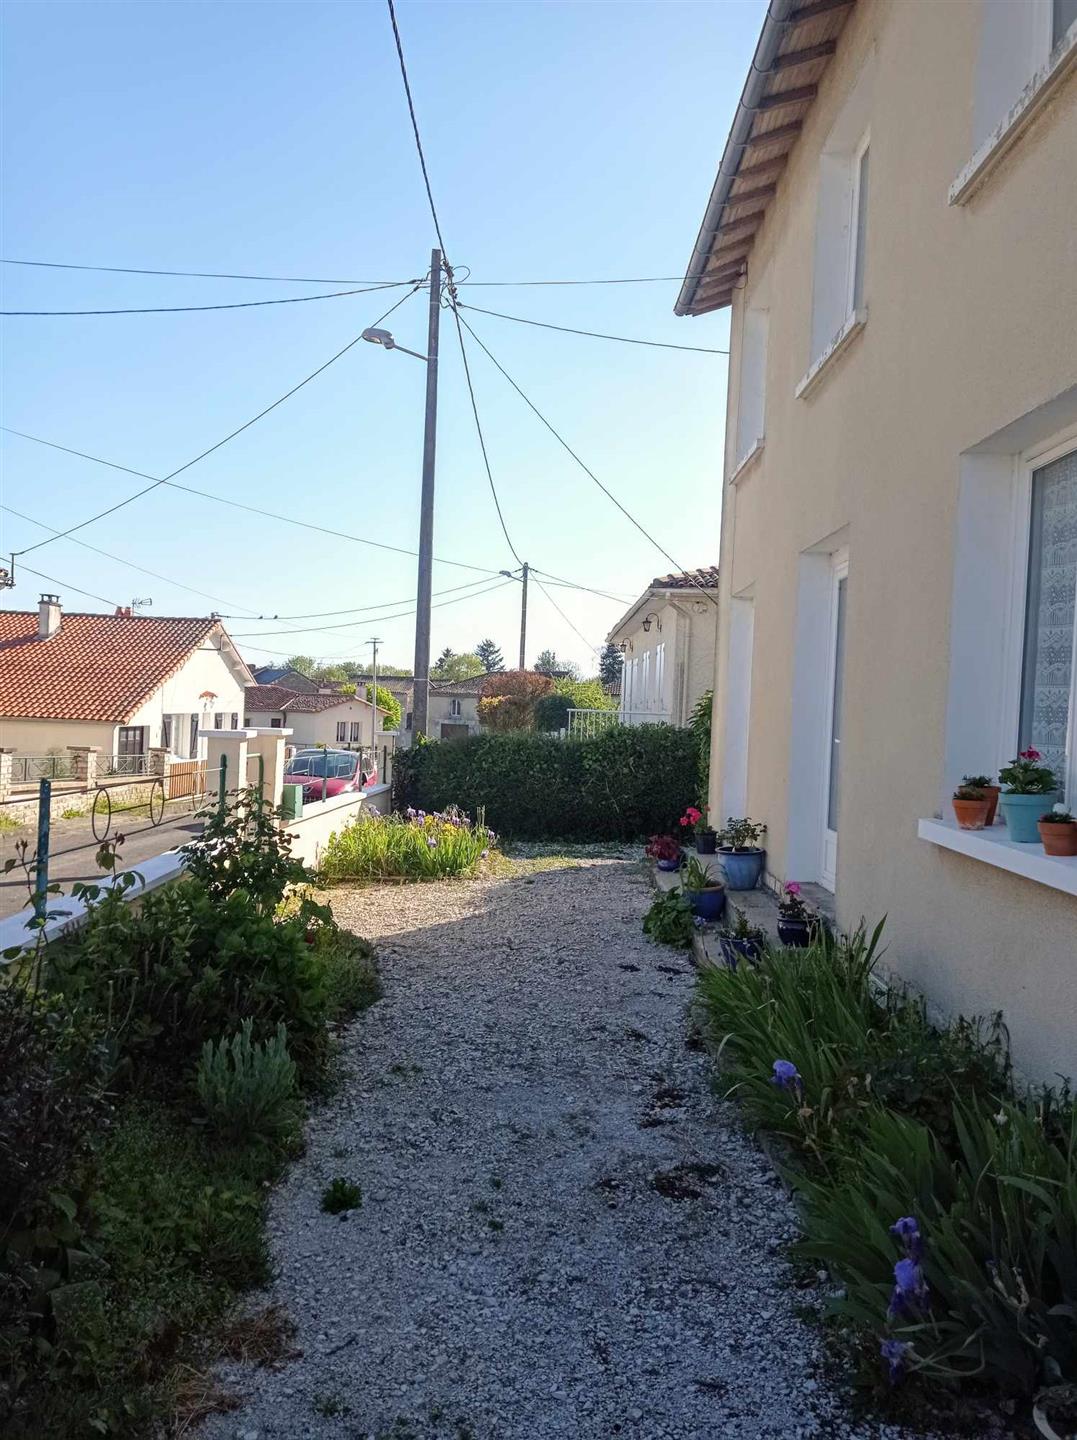 House for sale in the popular tourist destination of Charroux (86)